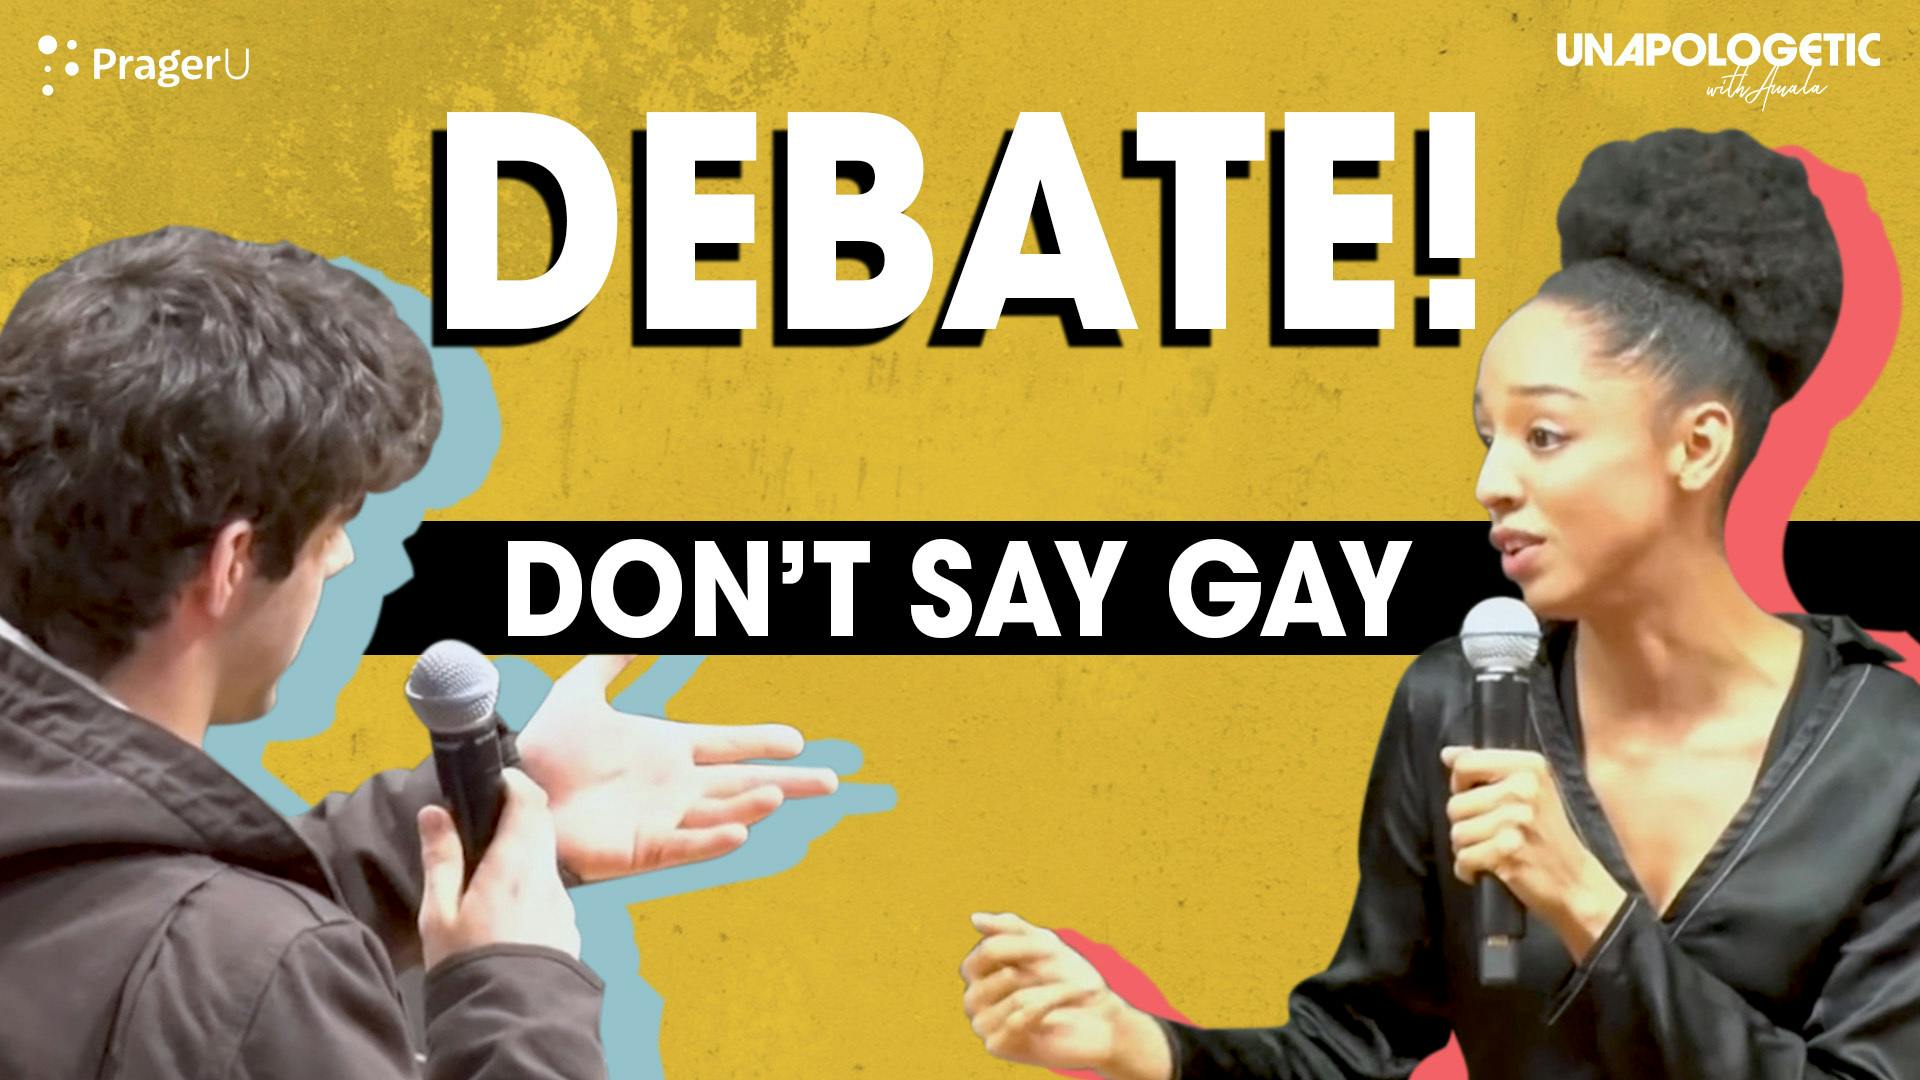 Debating Leftist Student on “Right-Wing Bigotry” & “Don’t Say Gay”